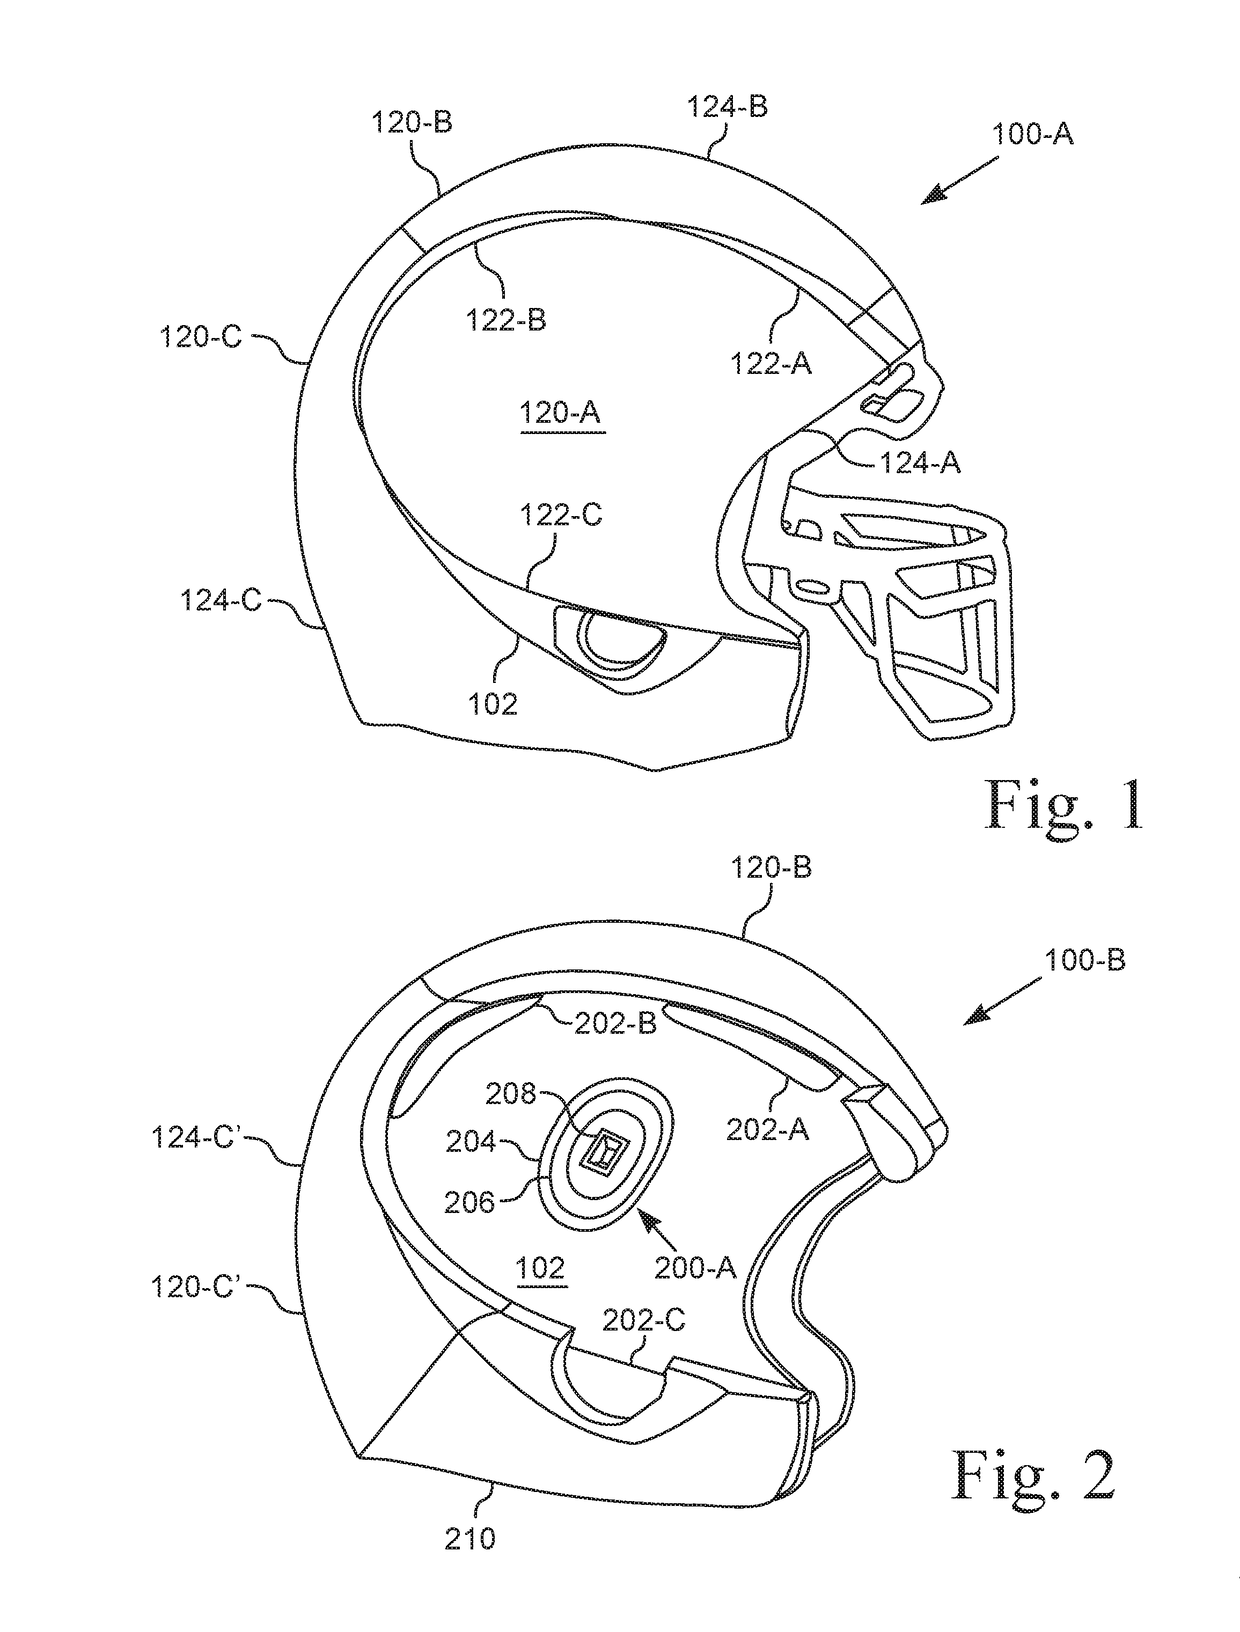 Helmet for Tangential and Direct Impacts